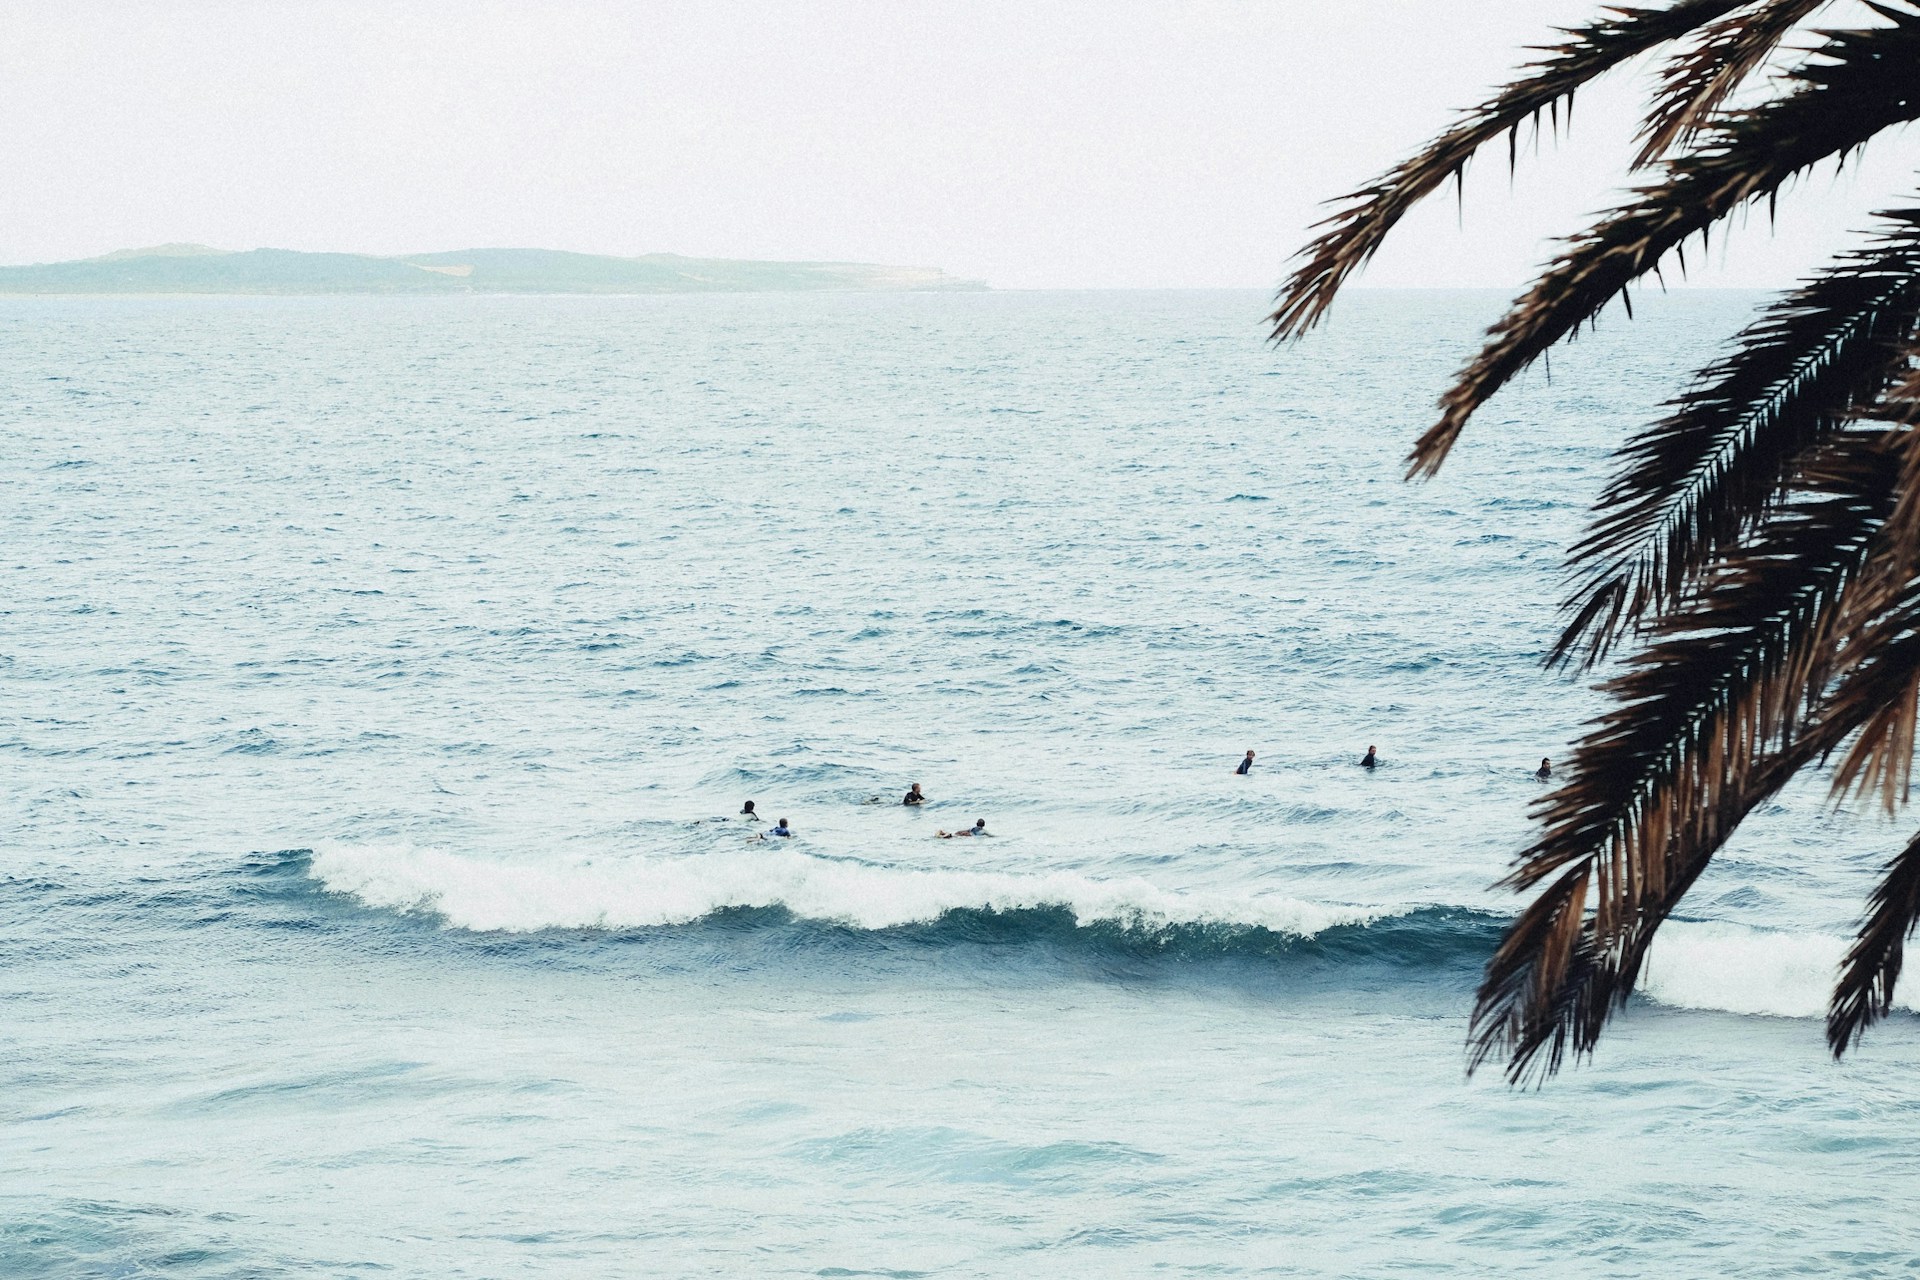 photo - blue ocean water with a palm tree ont he side, people surfing in the middle